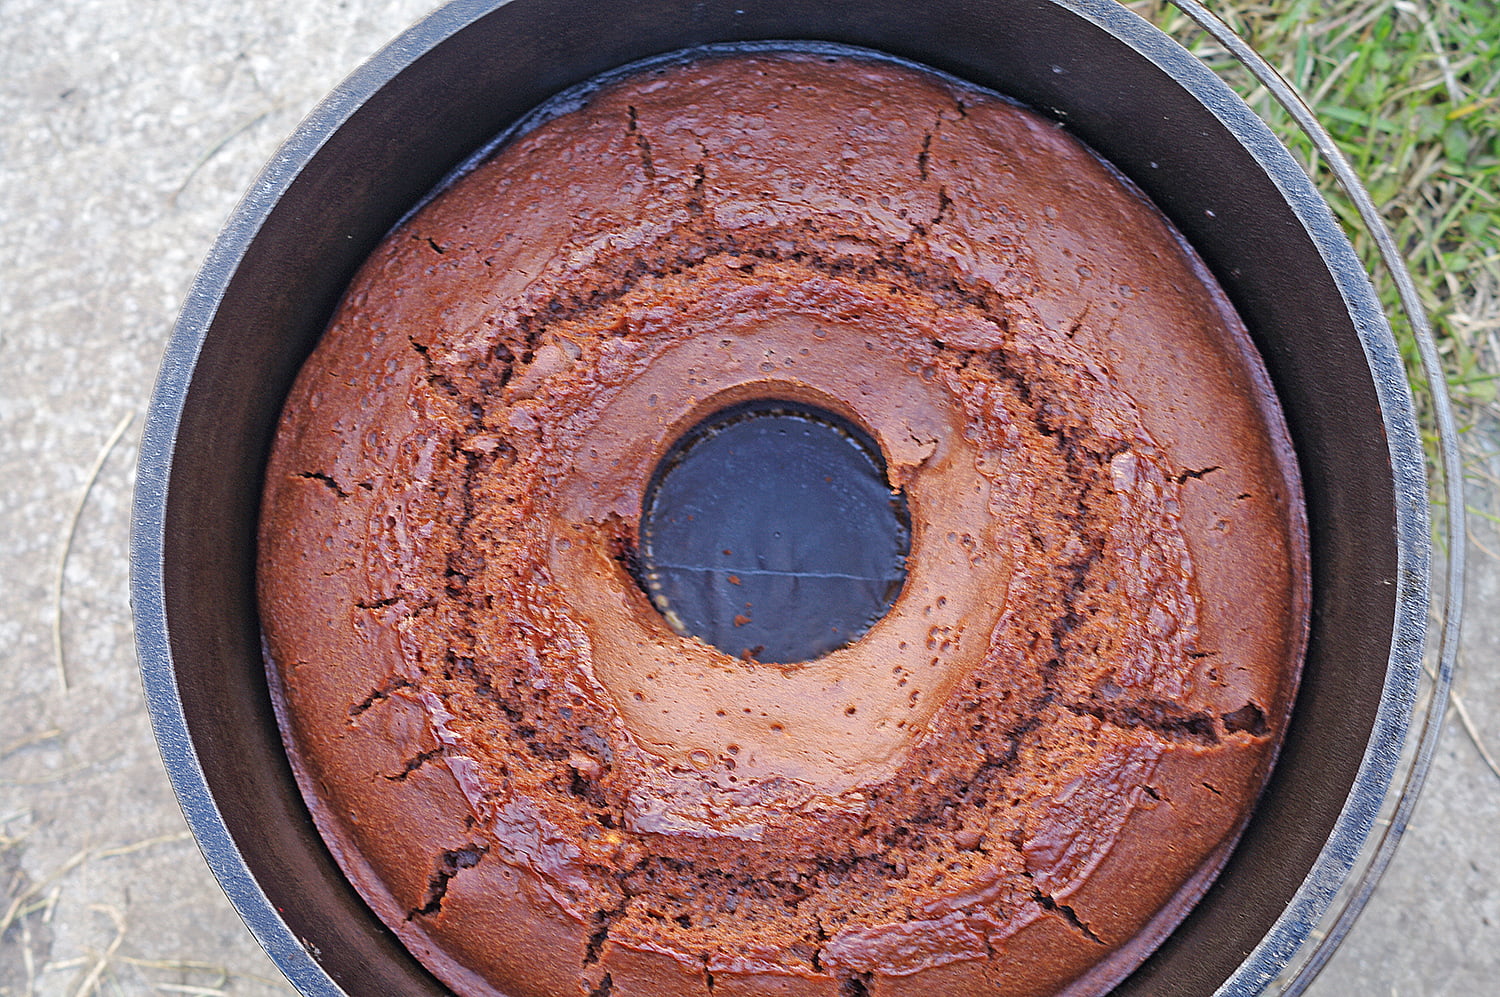 How to Make the Best Dutch Oven Chocolate Cake